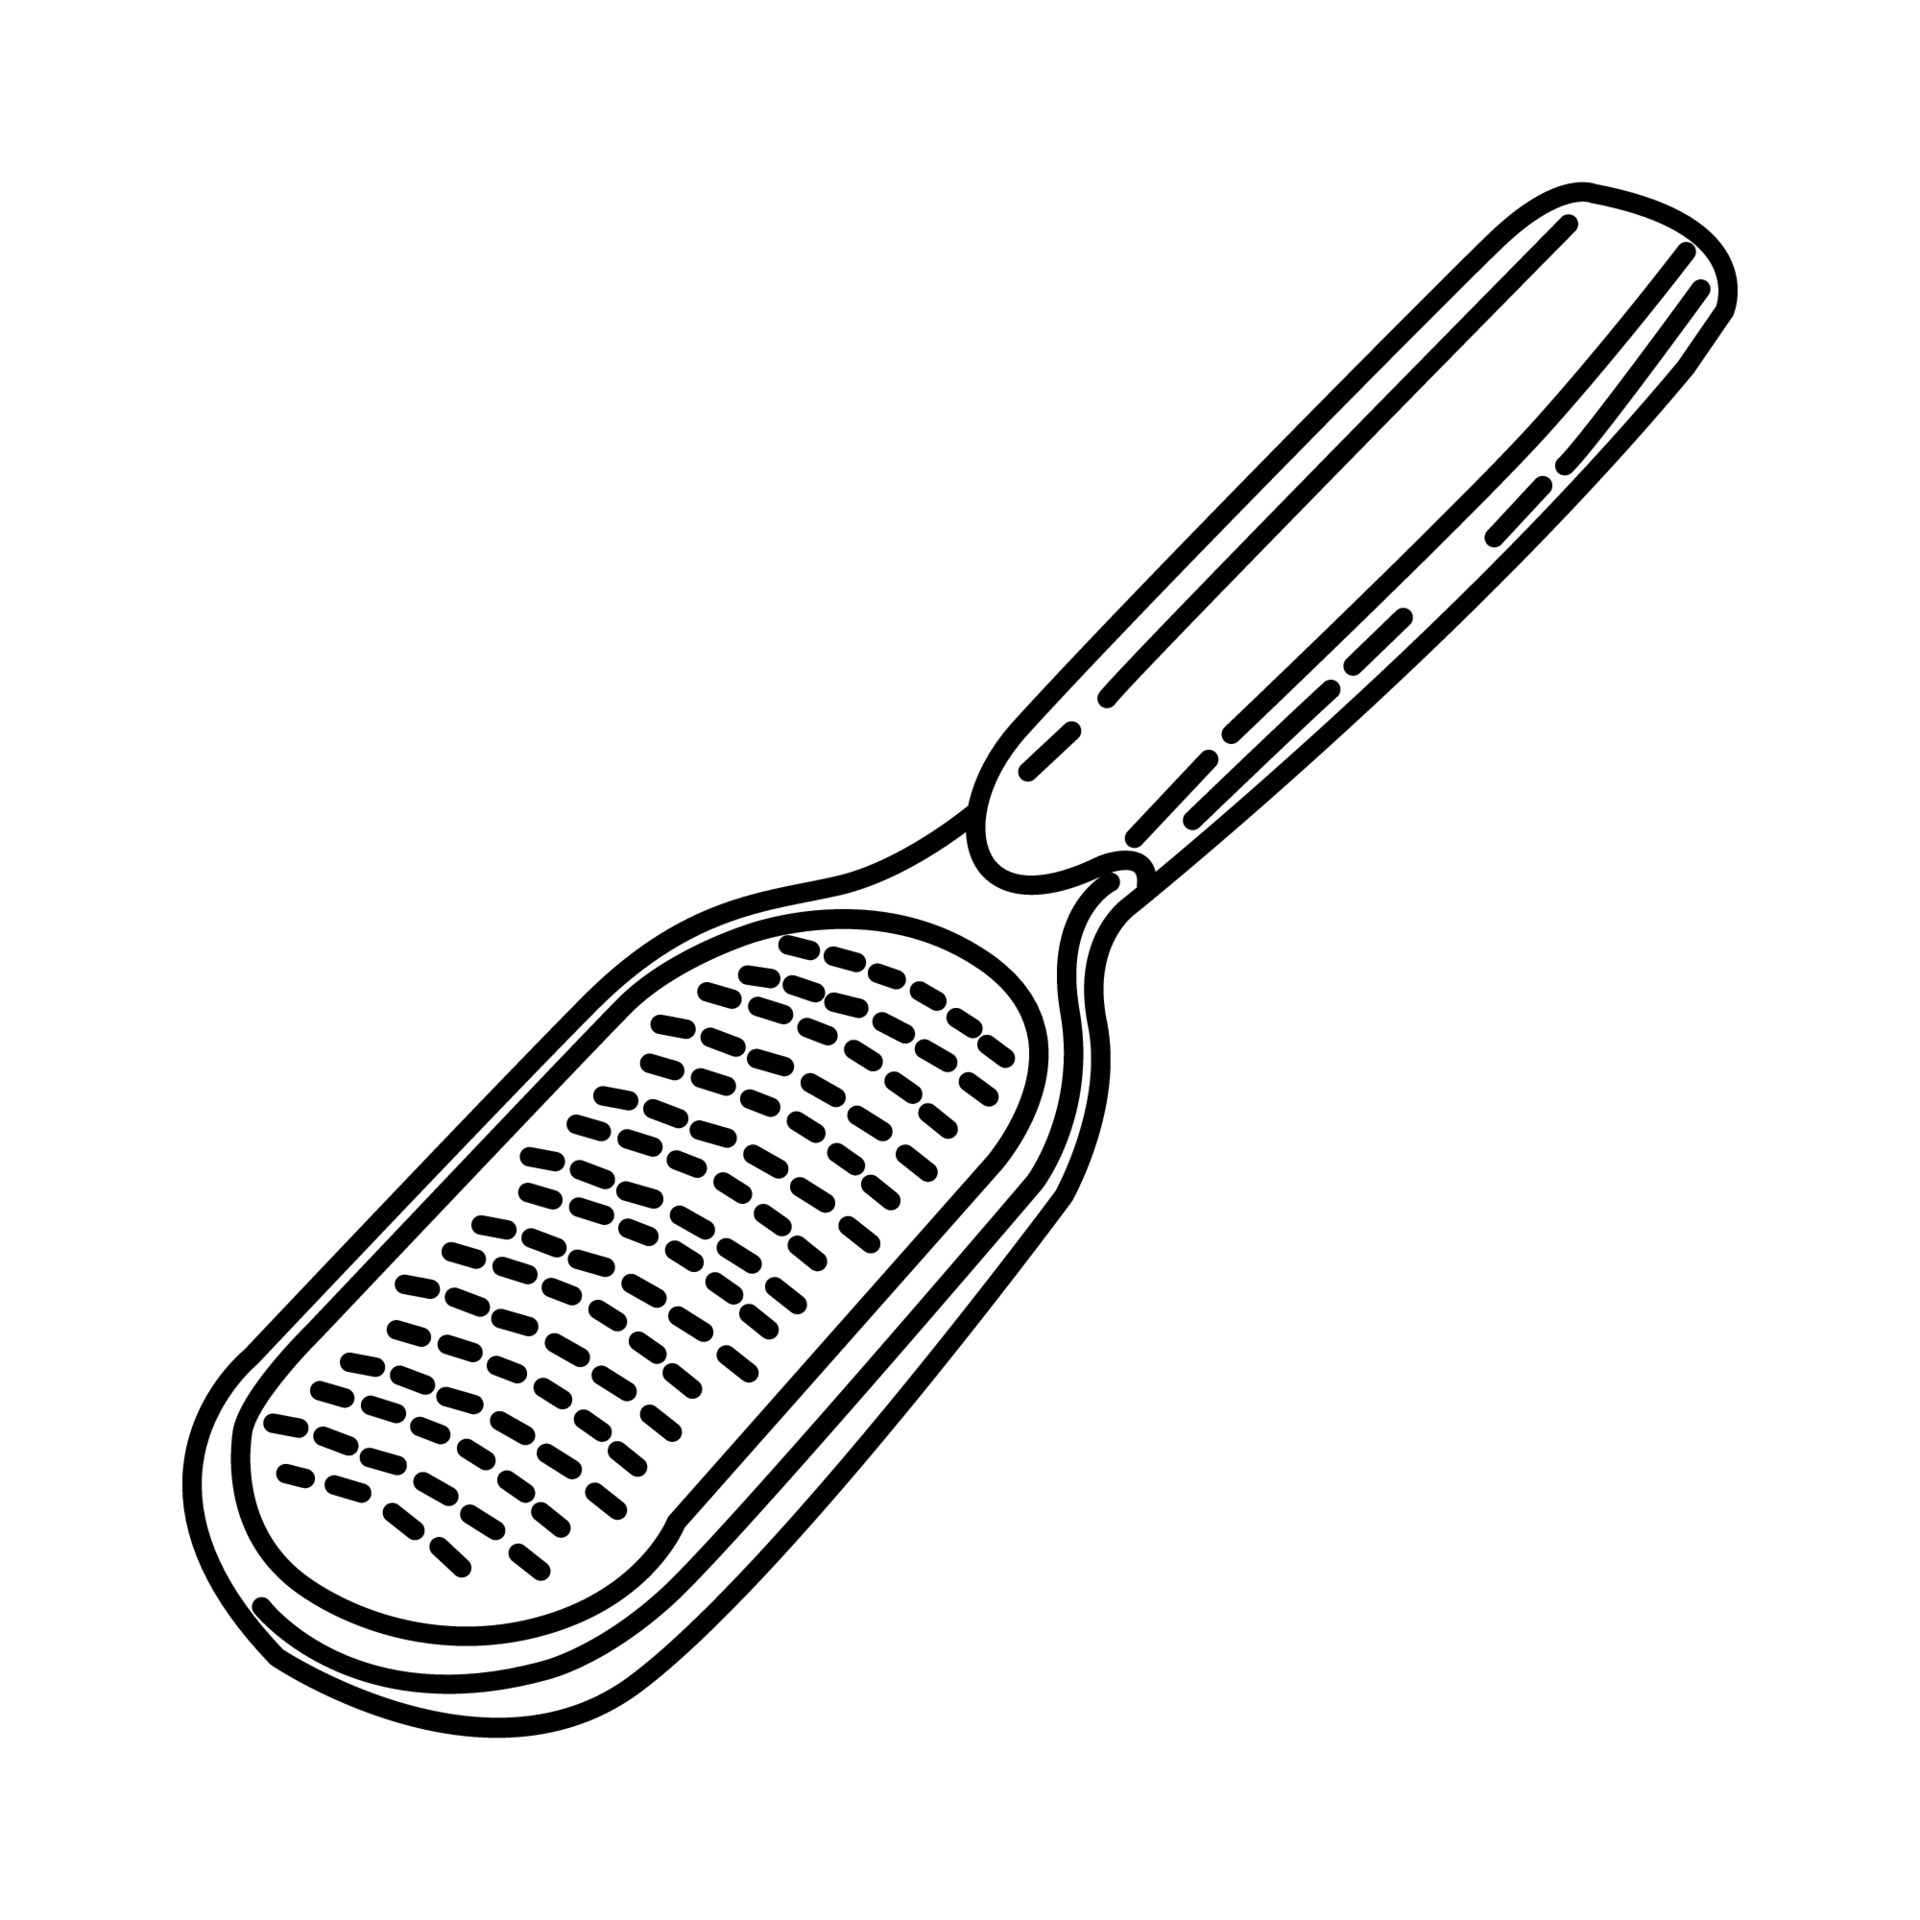 https://static.vecteezy.com/system/resources/previews/004/474/151/original/callus-foot-file-icon-doodle-hand-drawn-or-outline-icon-style-vector.jpg